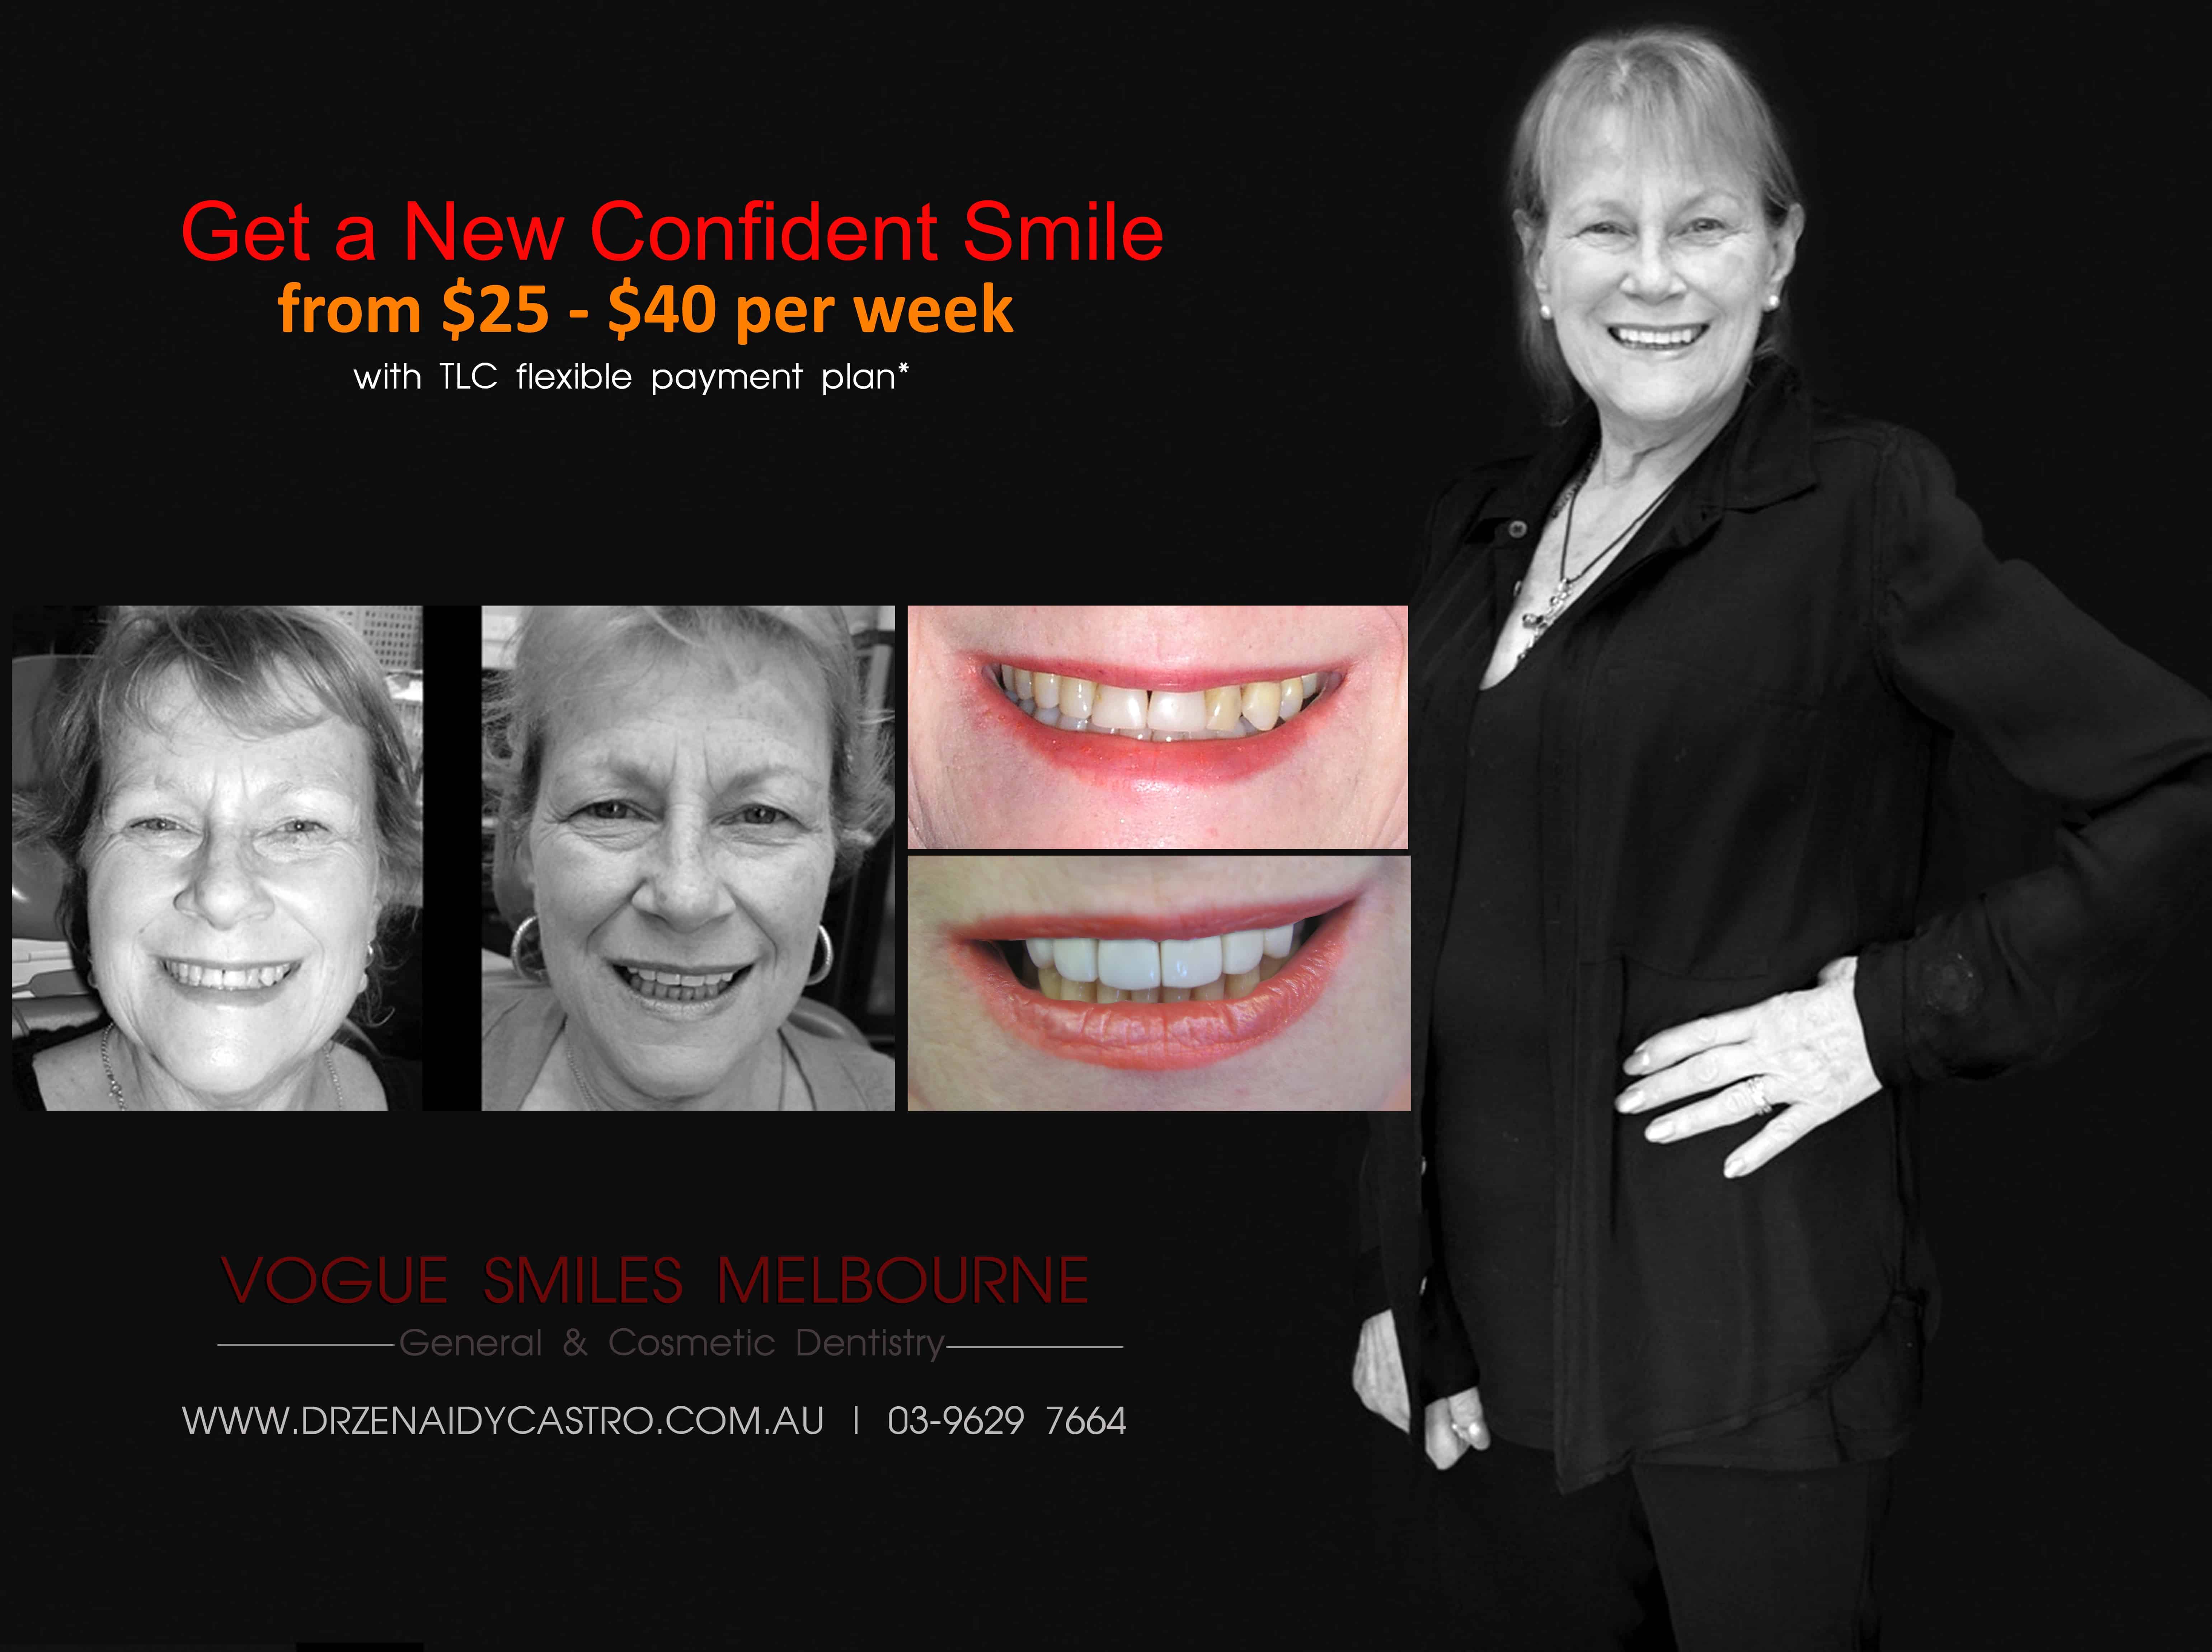 Cosmetic Dentistry Procedures and Treatments Melbourne CBD - Best Cosmetic Dentists in Melbourne, VIC -leading Australian Cosmetic Dentist